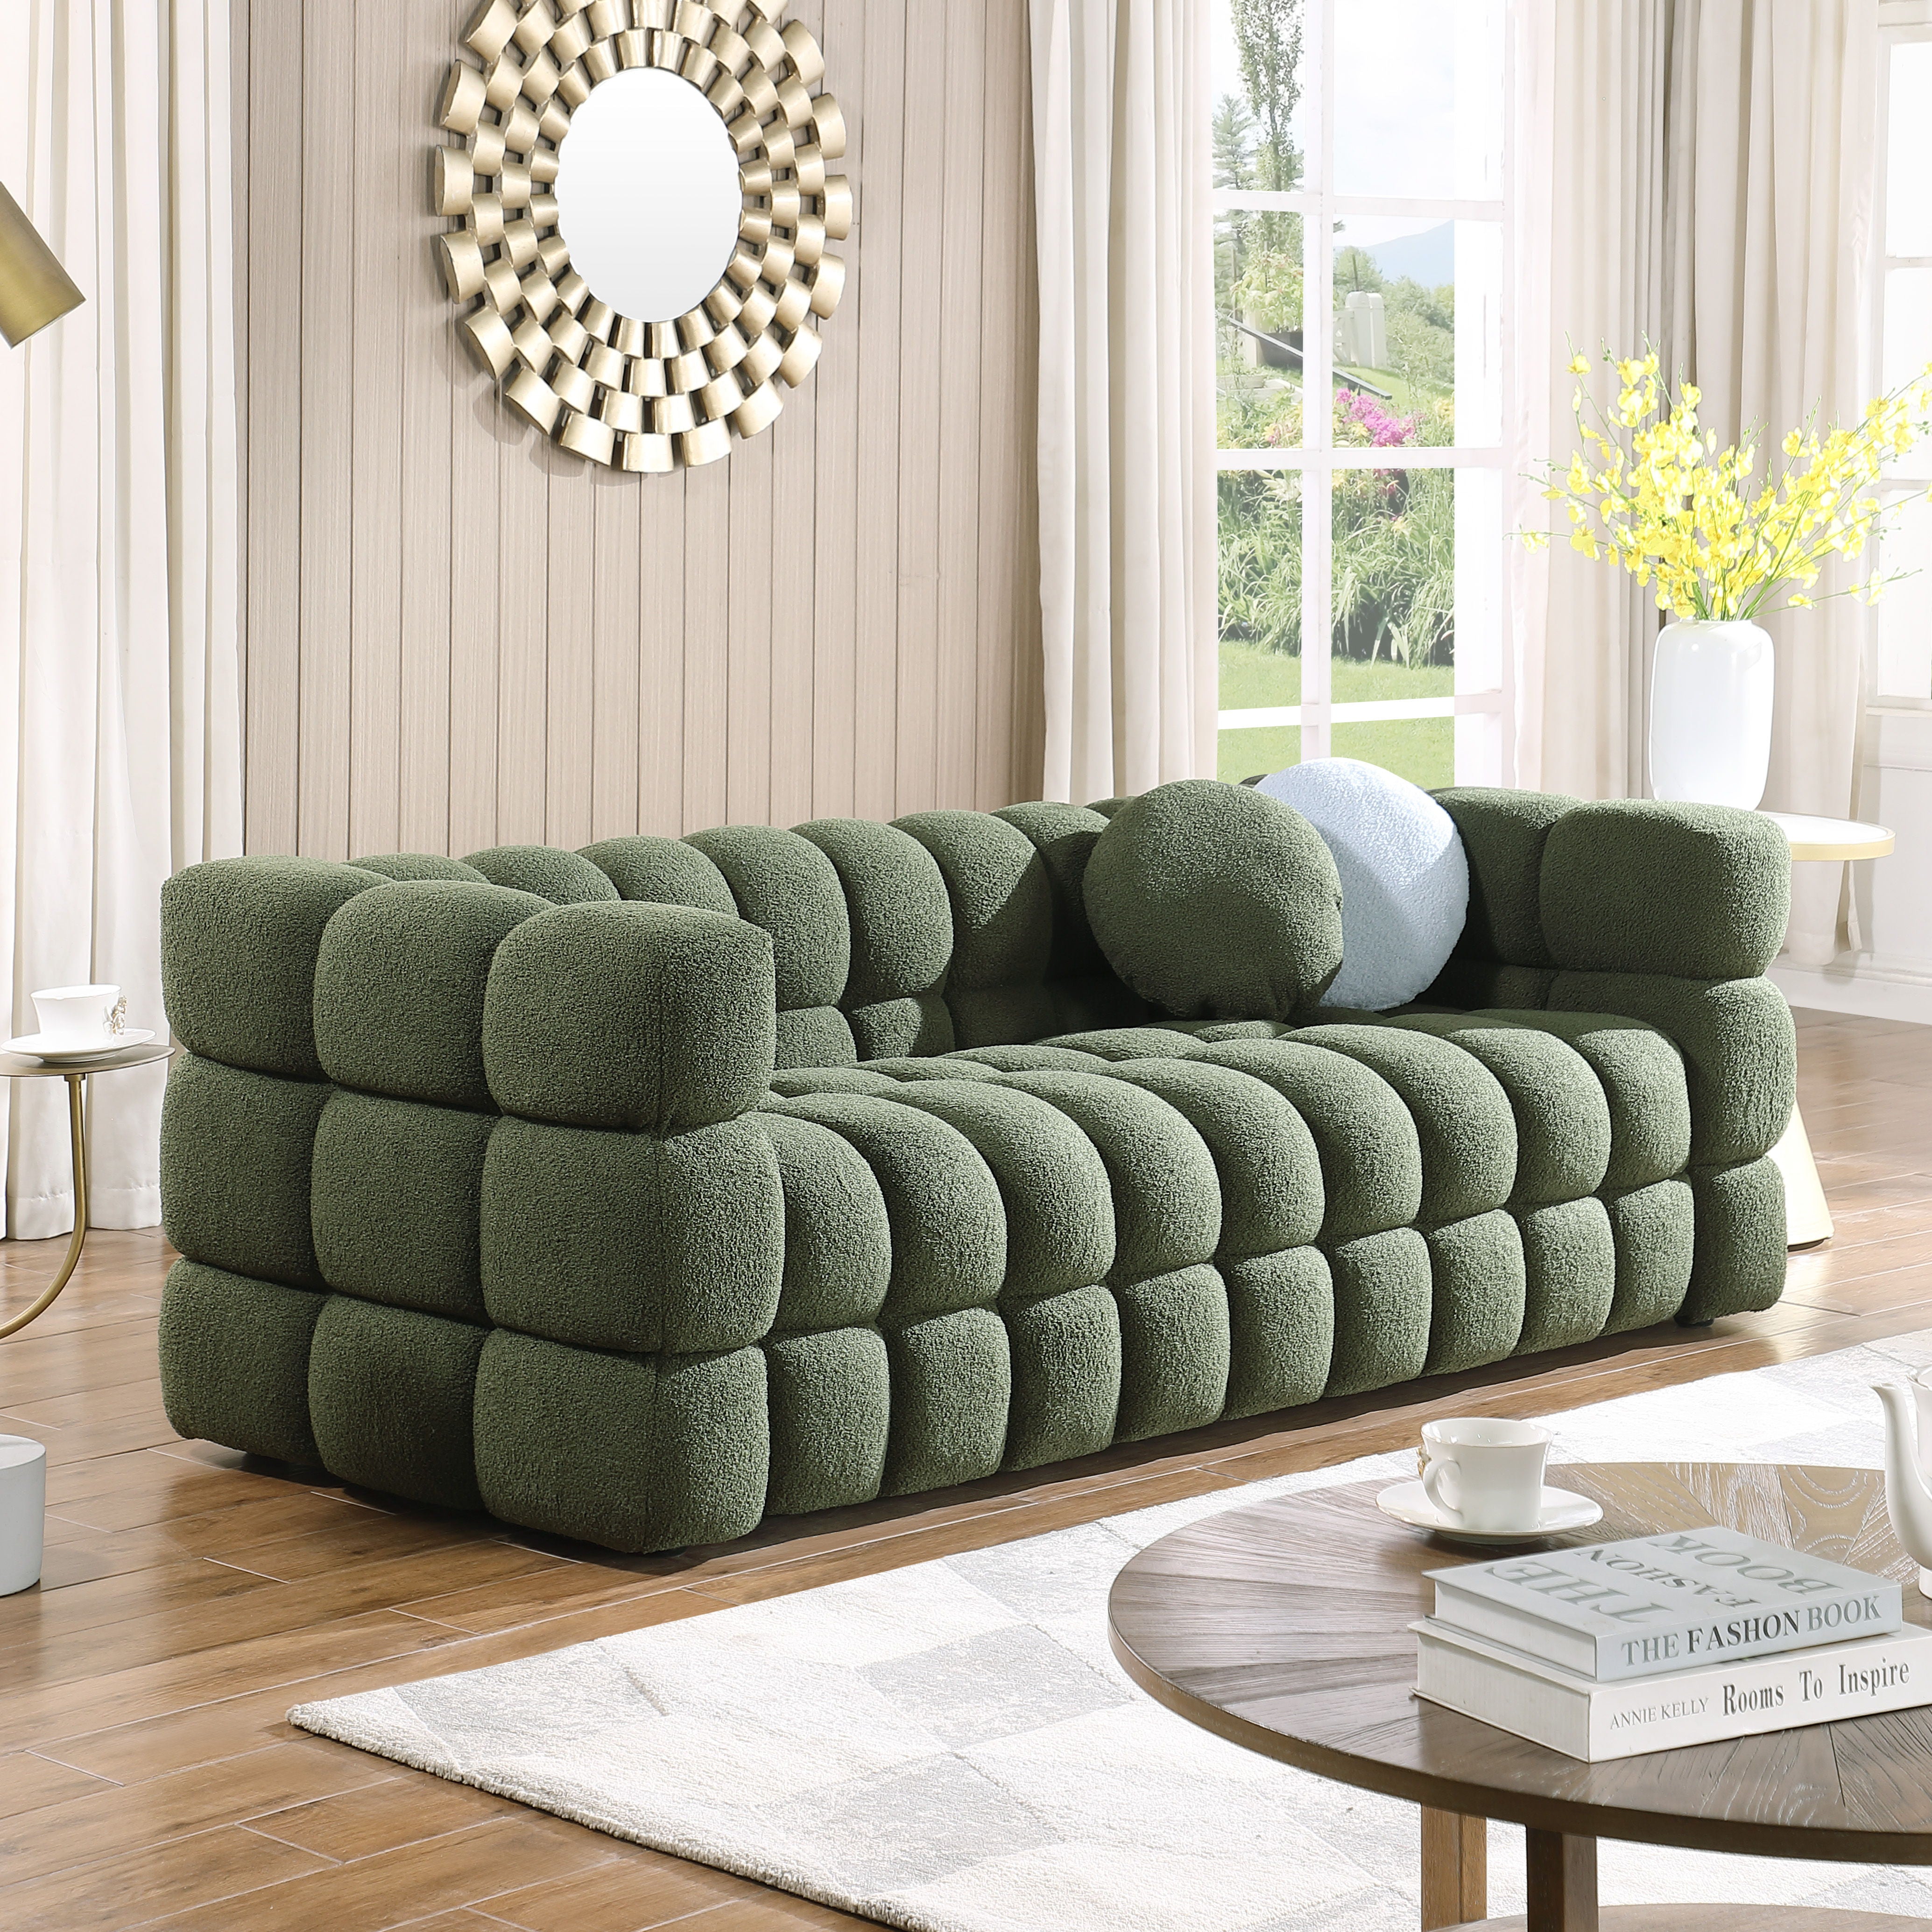 84.3 Length, 35.83" Deepth, Human Body Structure For Usa People, Marshmallow Sofa, Boucle Sofa, 3 Seater, Olive Green Boucle